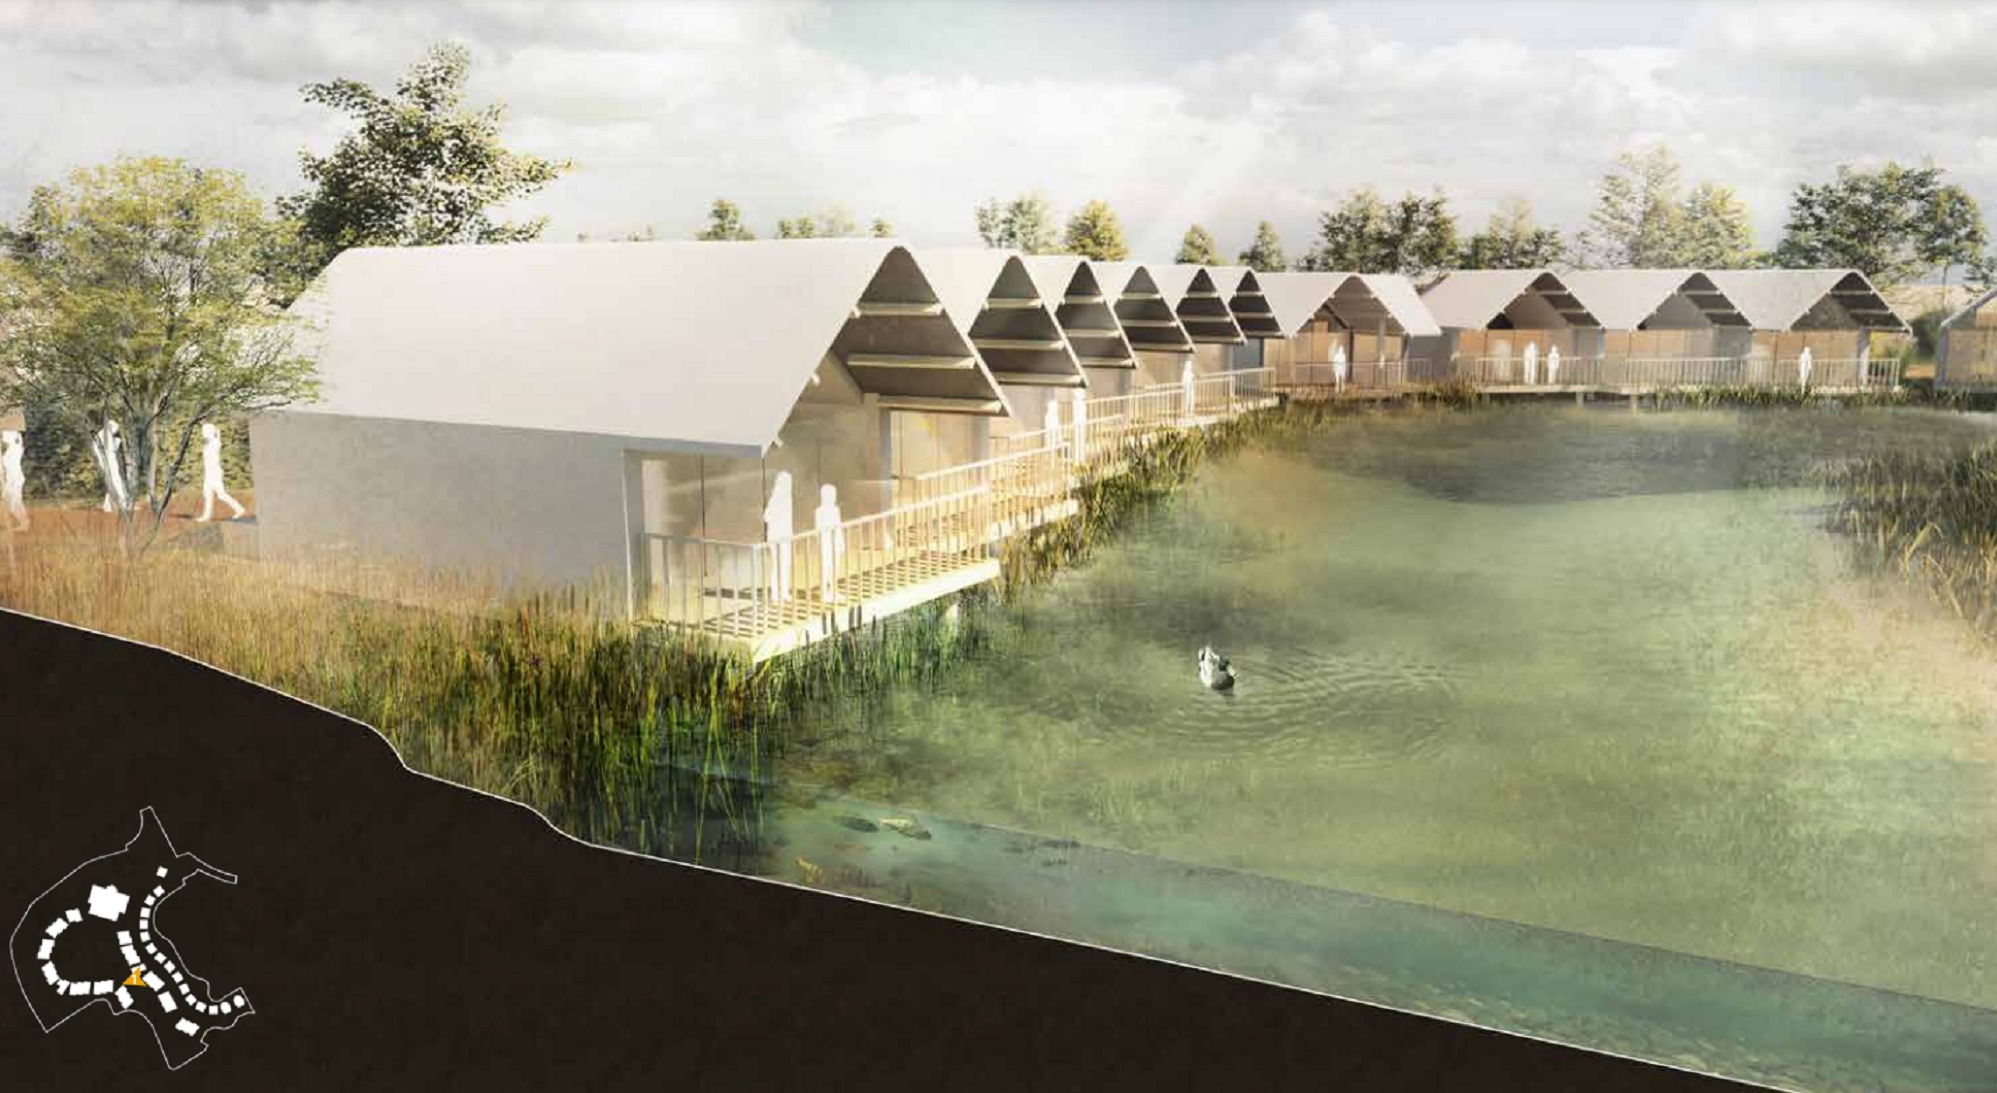 What the proposed overnight lodges will look like at Chester Zoo. Source: Planning document.